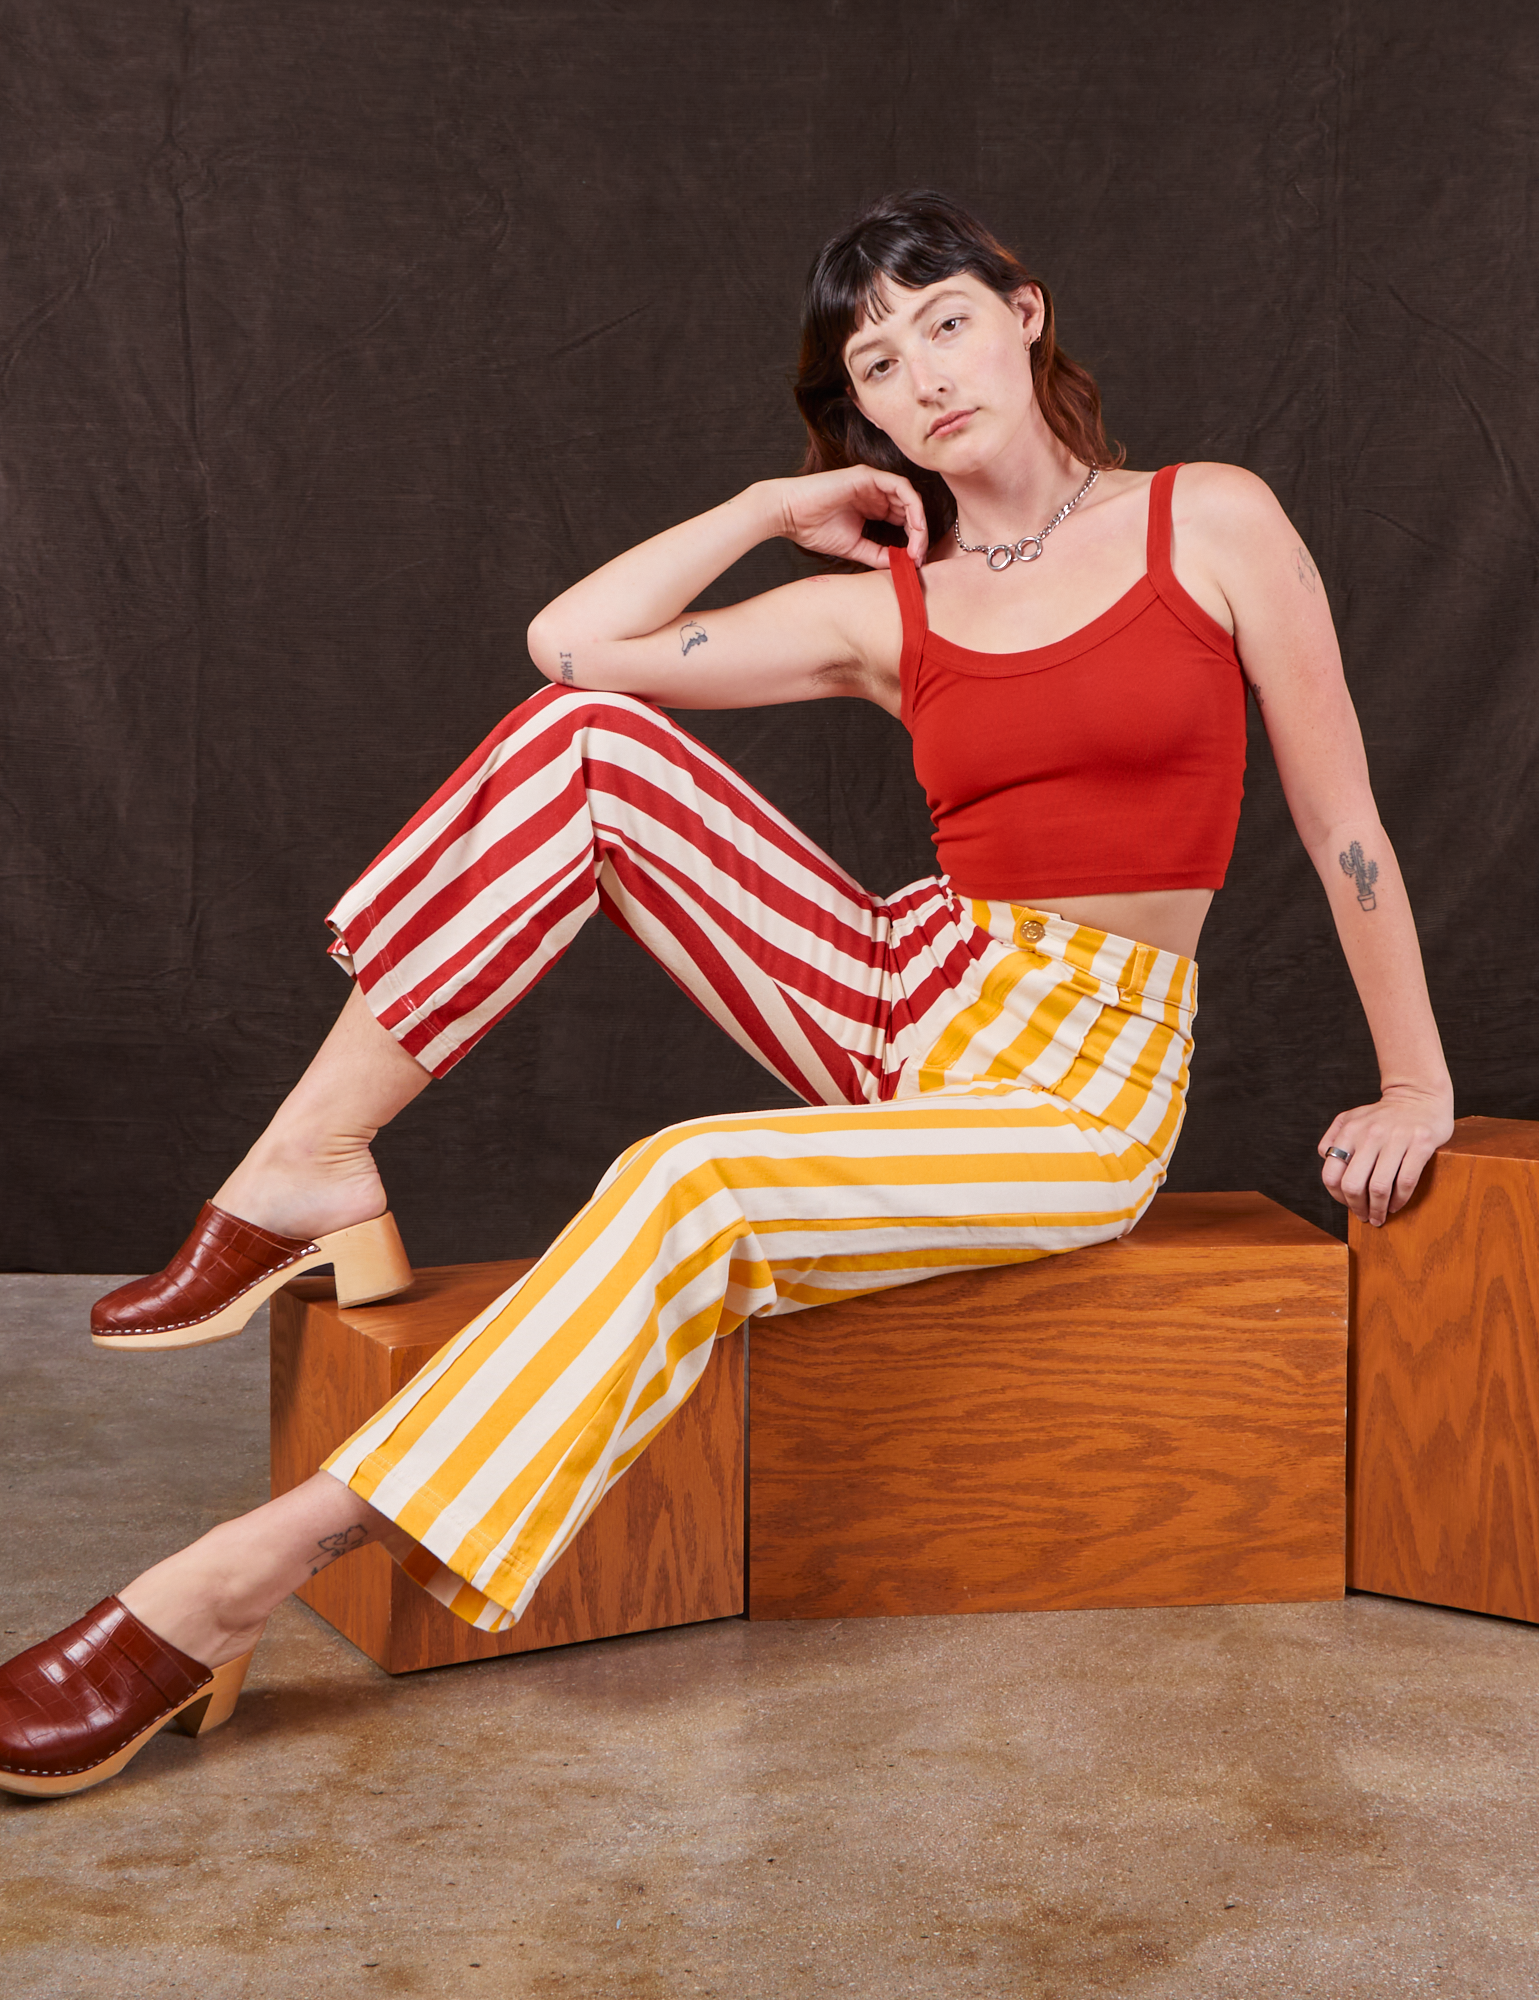 Alex is wearing Western Pants in Ketchup/Mustard Stripes and mustang red Cami